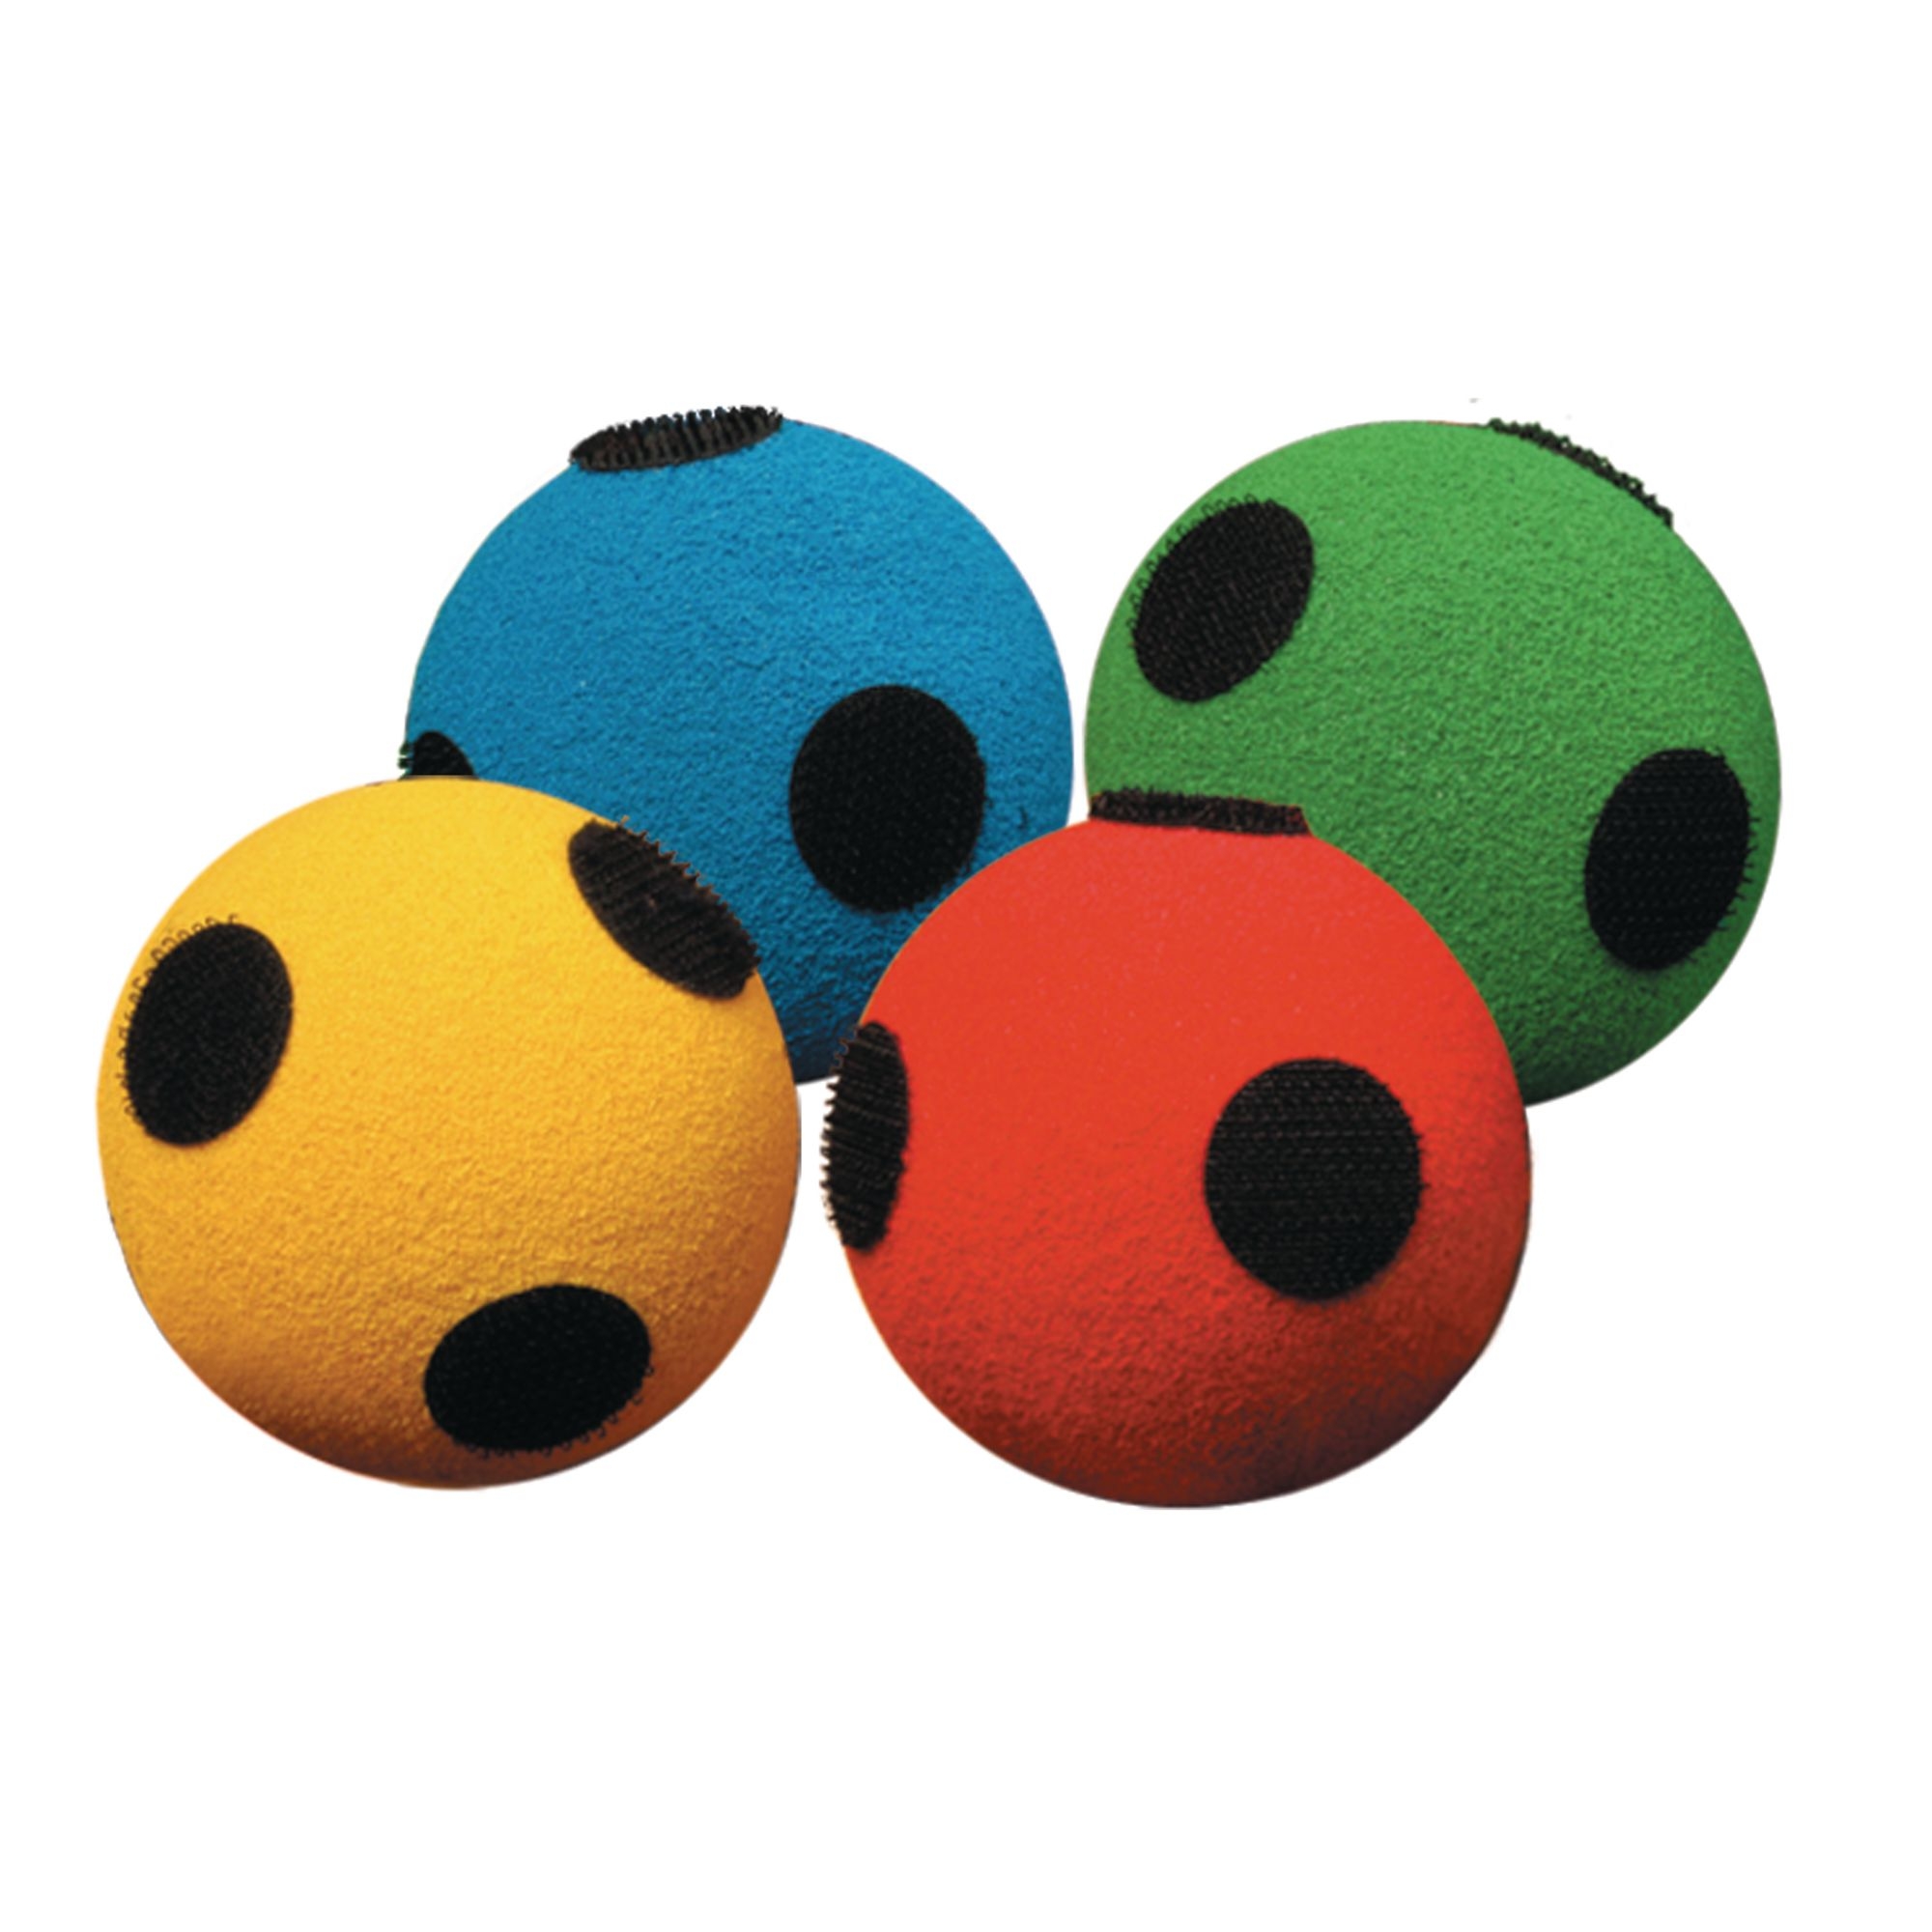 Sticky Target Balls - Pack of 40